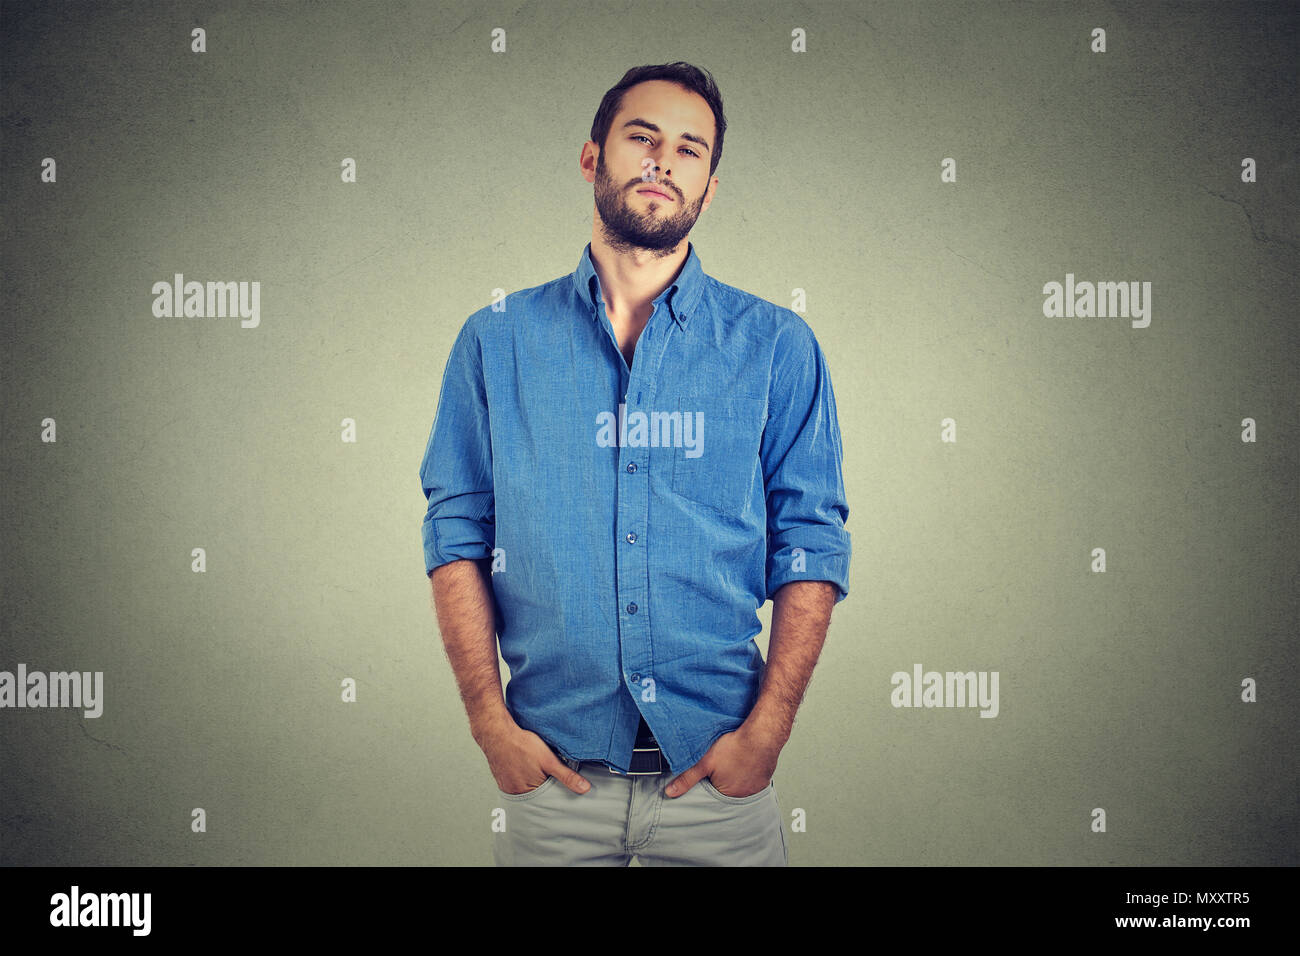 Arrogant self confident man in high self esteem standing with hands in pockets looking at camera Stock Photo